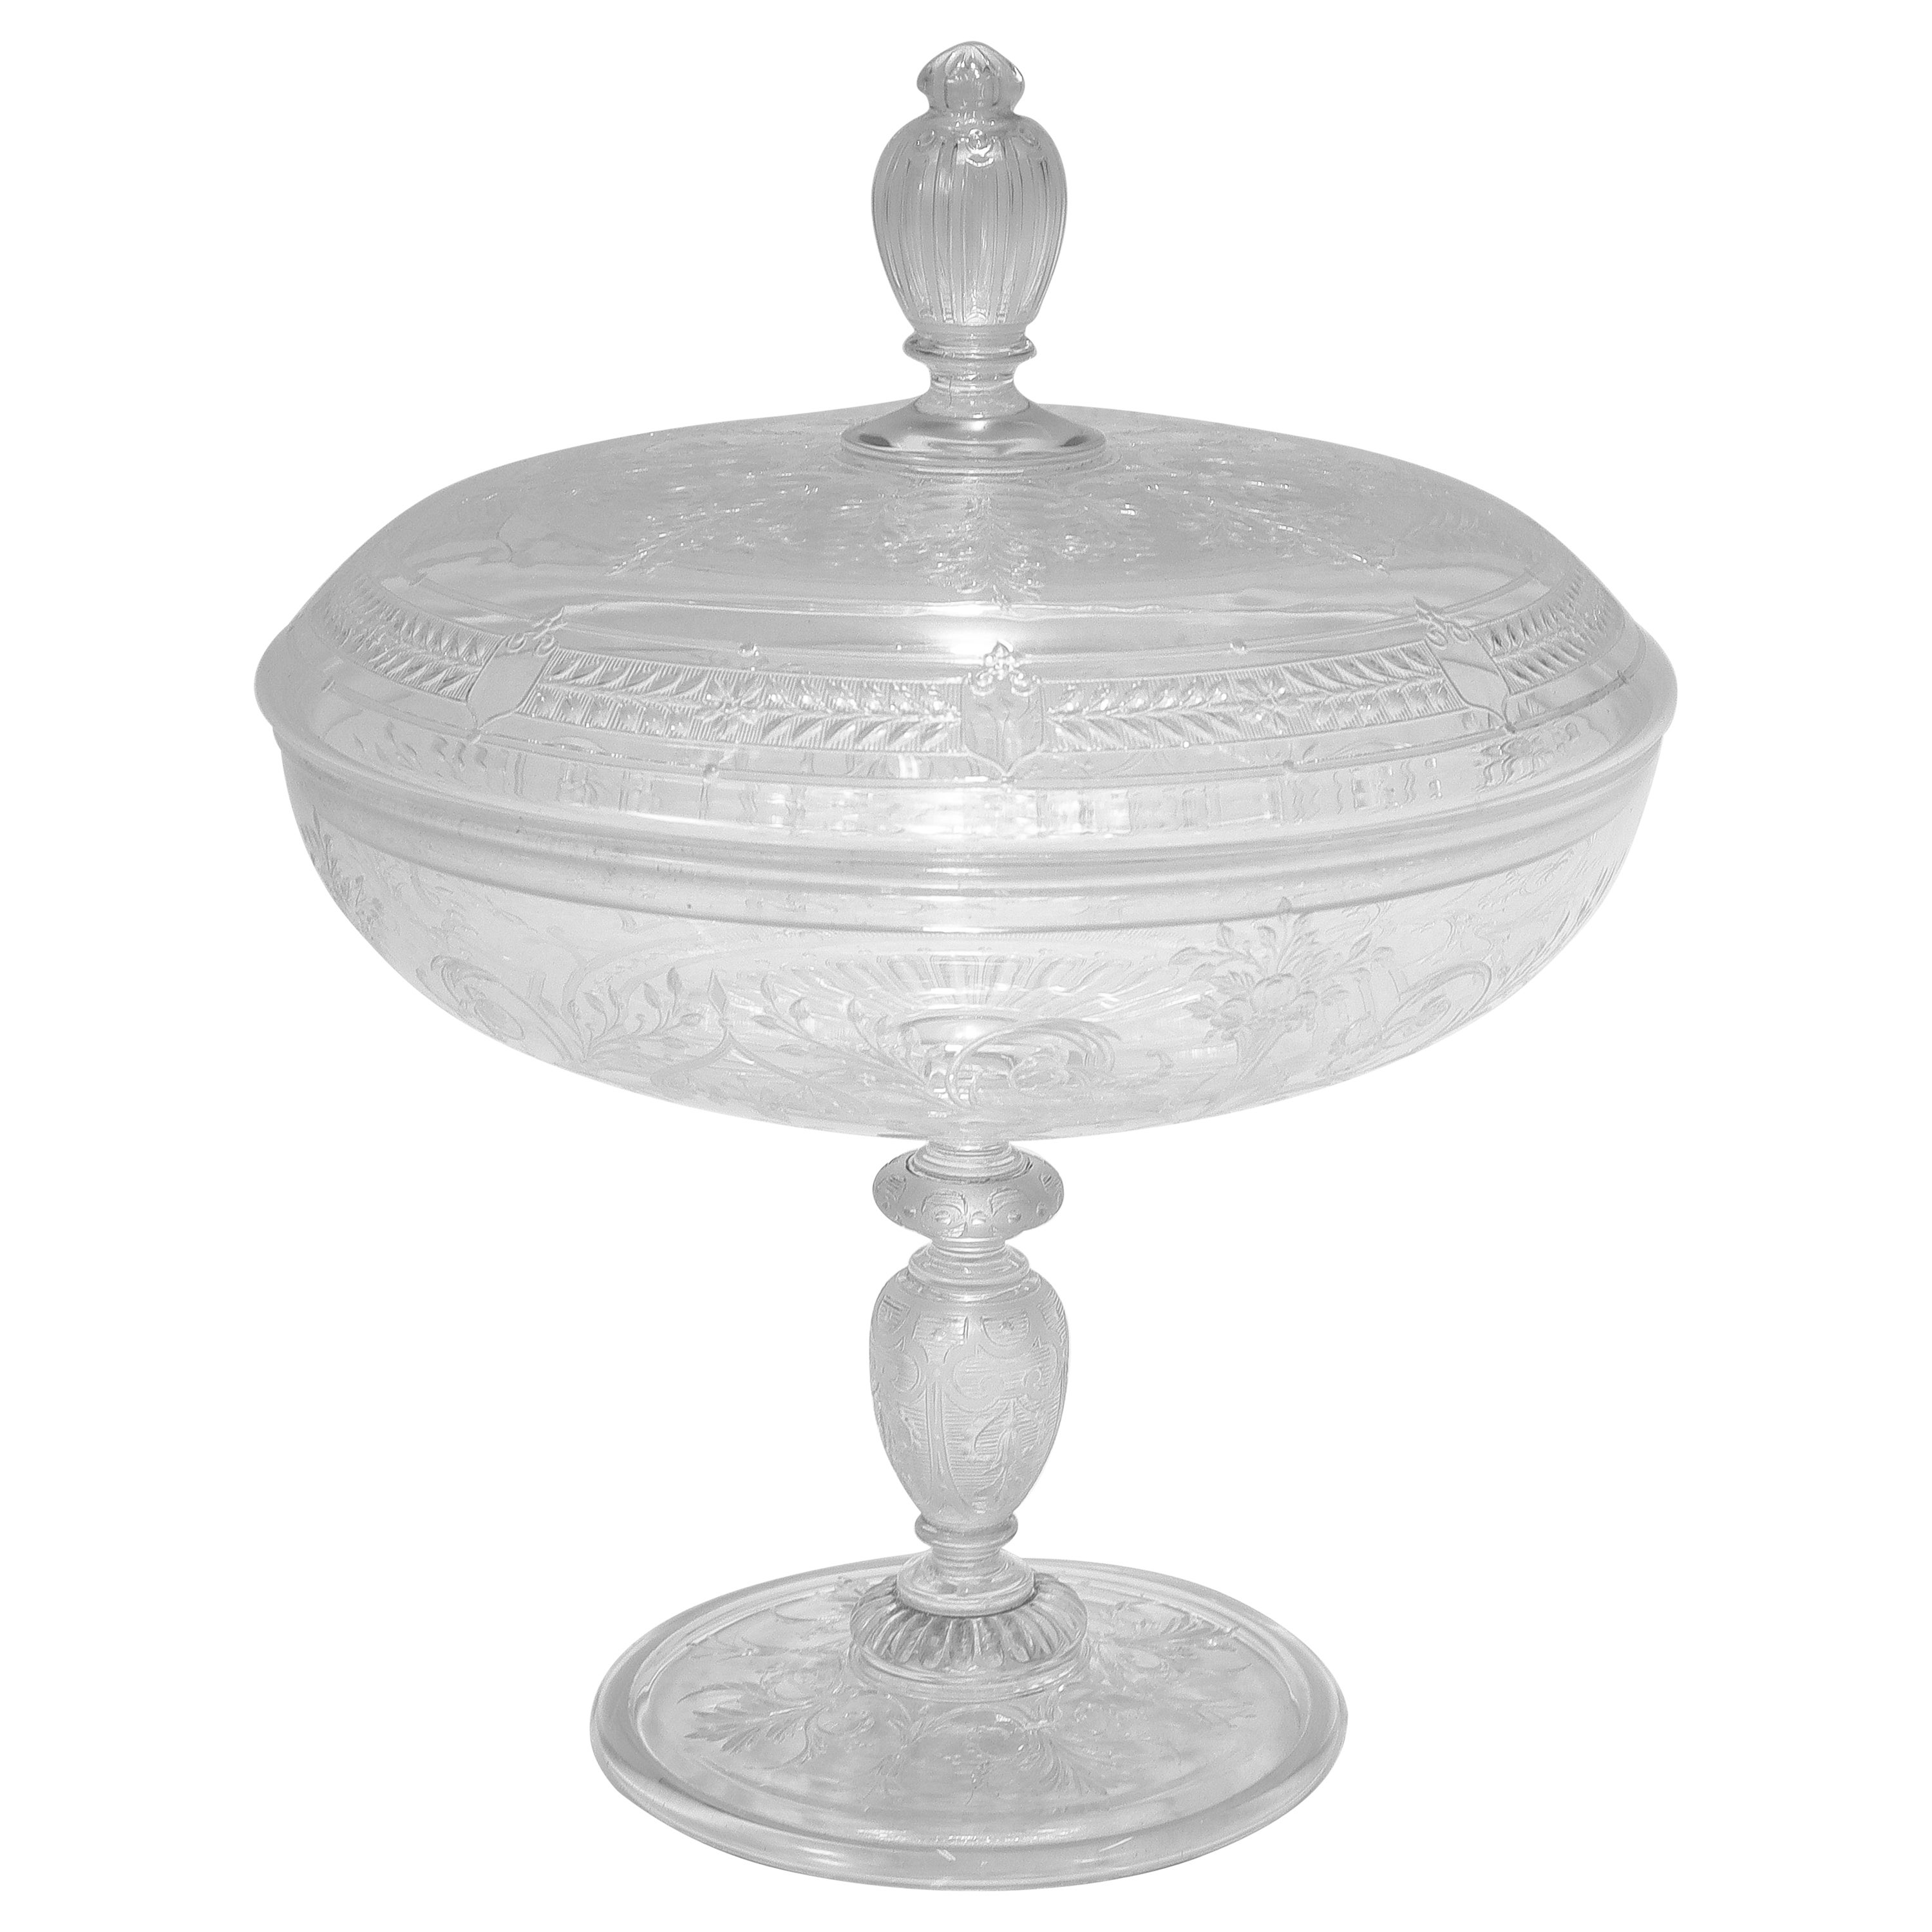 Antique Stourbridge Etched & Engraved Glass Lidded Compote or Tazza For Sale